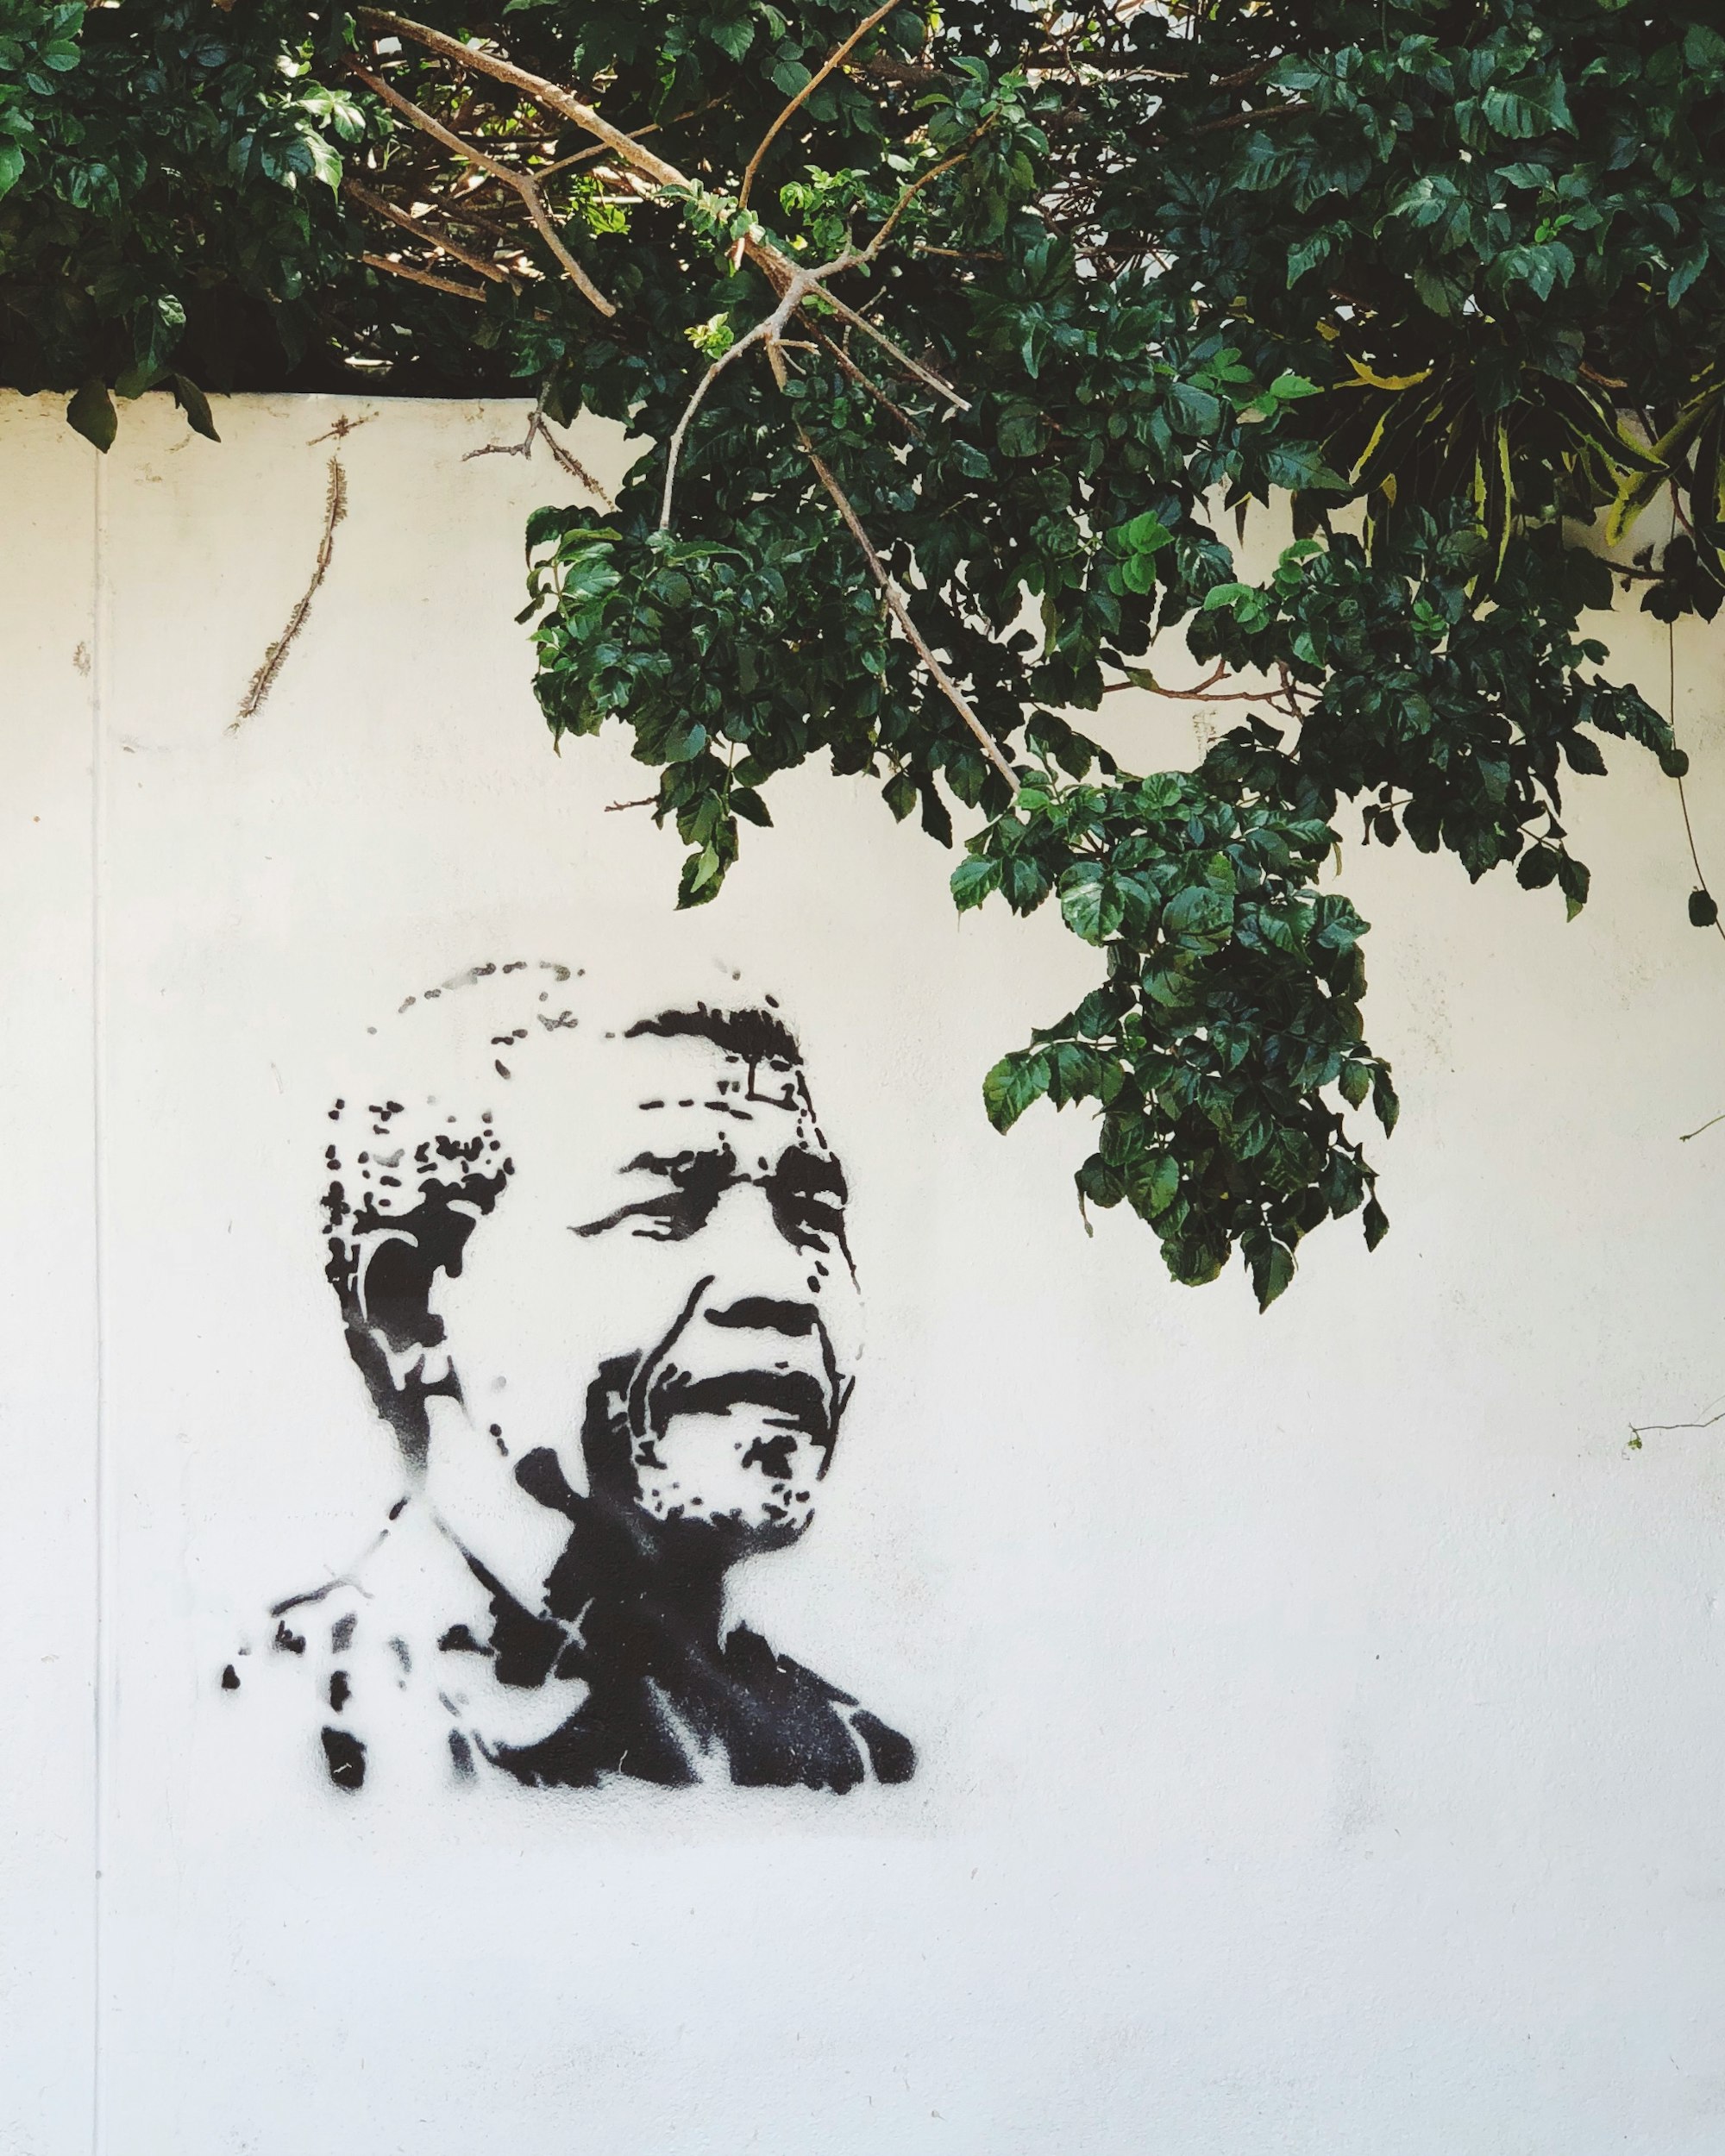 FREE MANDELA and other cardboard signs